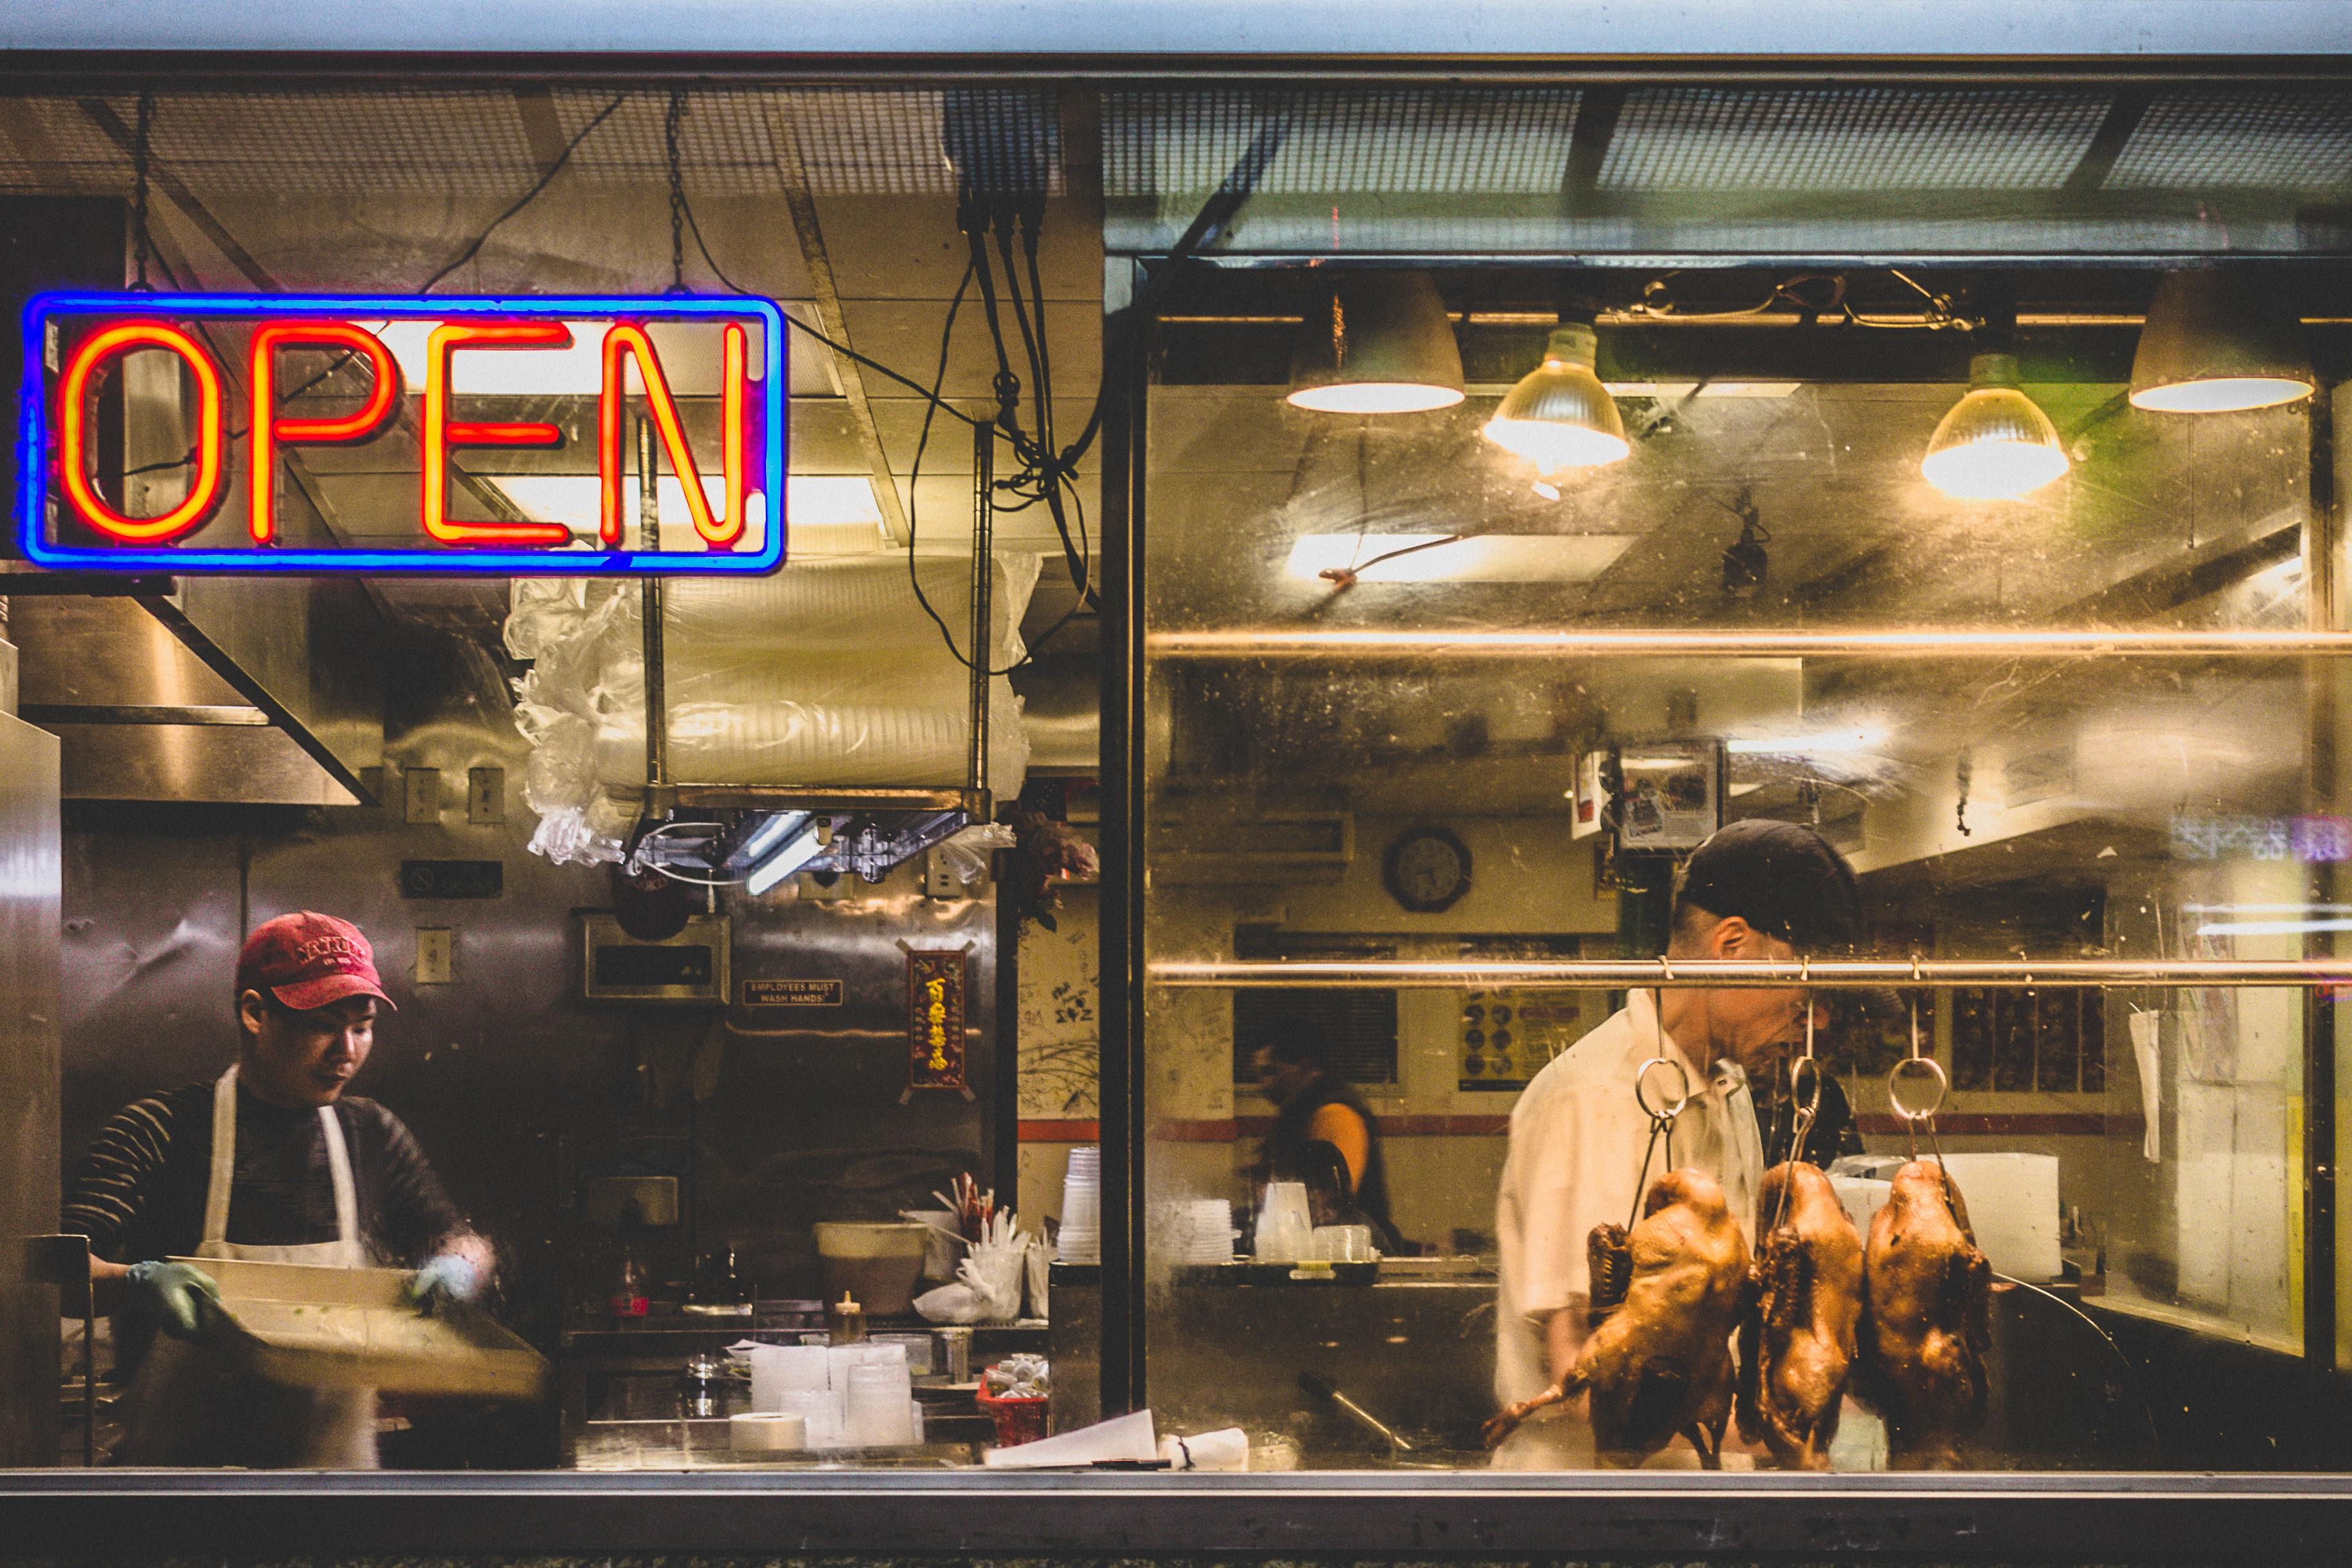 4 Business Lessons Every Restaurant Should Apply